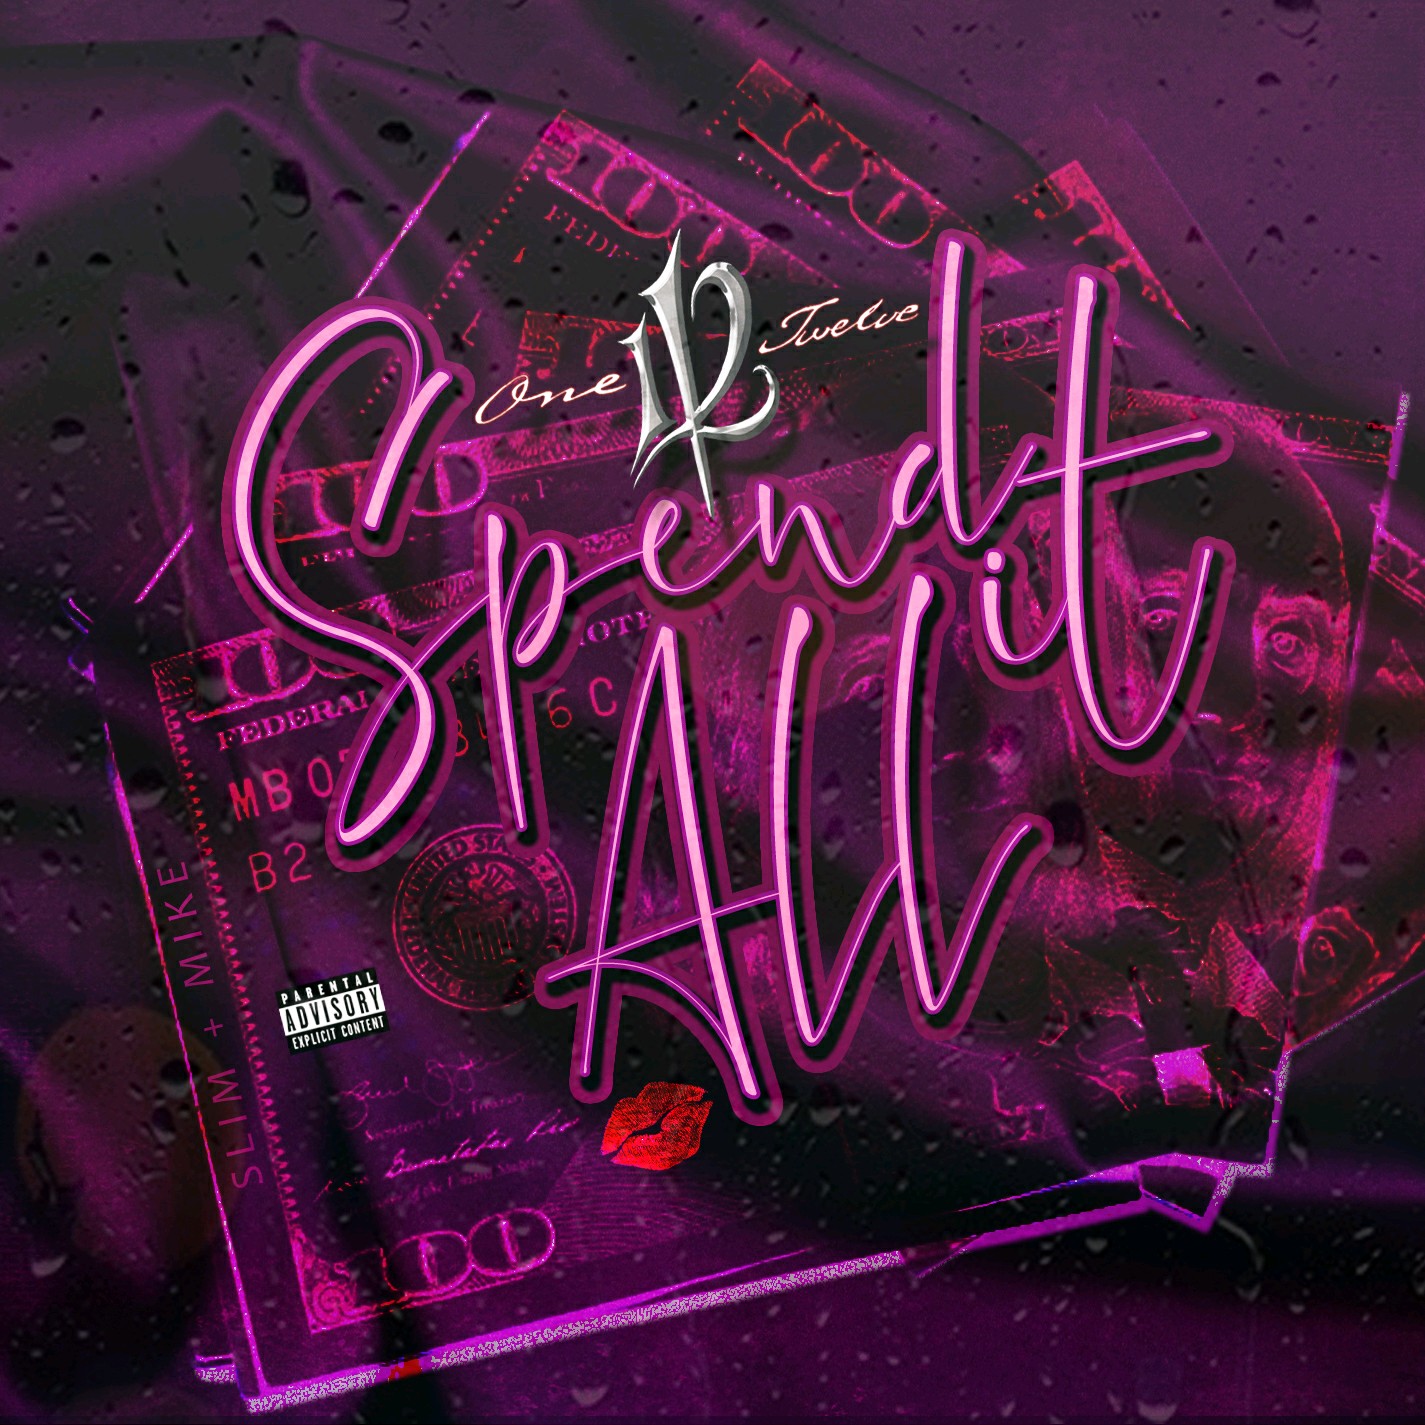 112 To Release New Single “Spend it All” This Month + Announce “112 Forever: Slim & Mike” EP